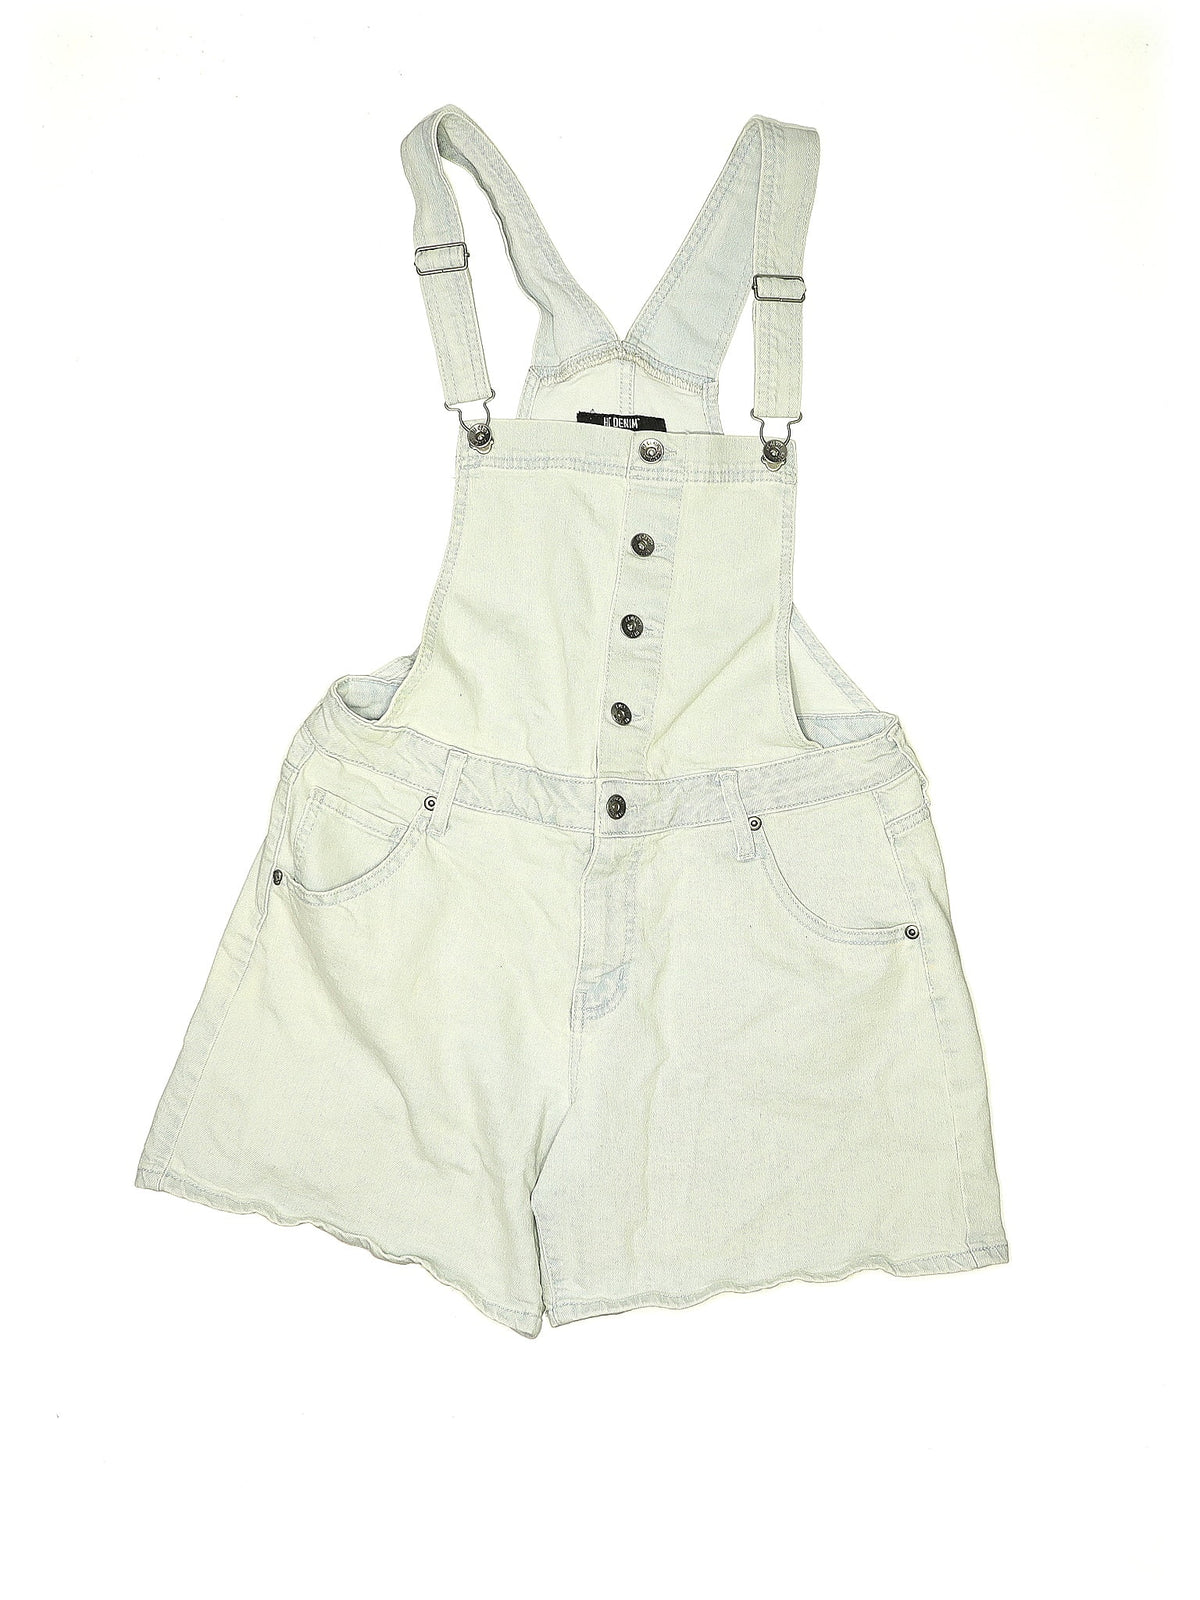 Overall Shorts size - M